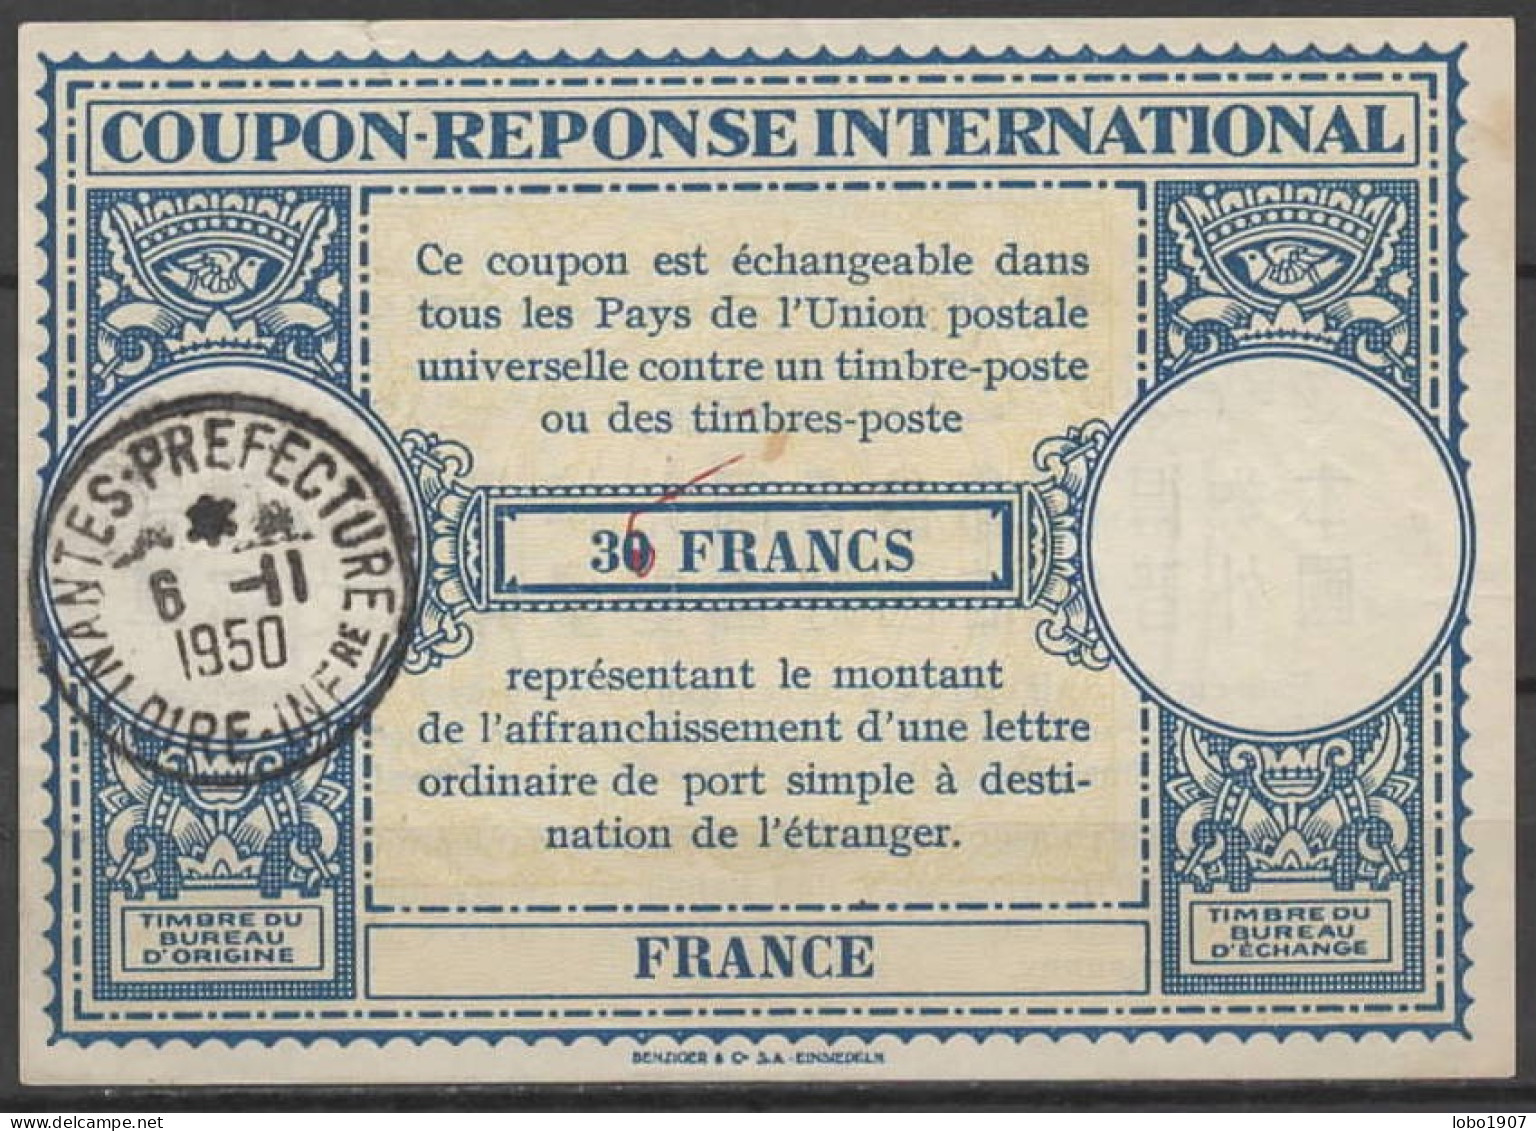 FRANCE Lo15 35 / 30 FRANCS International Reply Coupon Reponse Antwortschein IRC IAS O NANTES PREFECTURE 06.11.50 - Antwoordbons